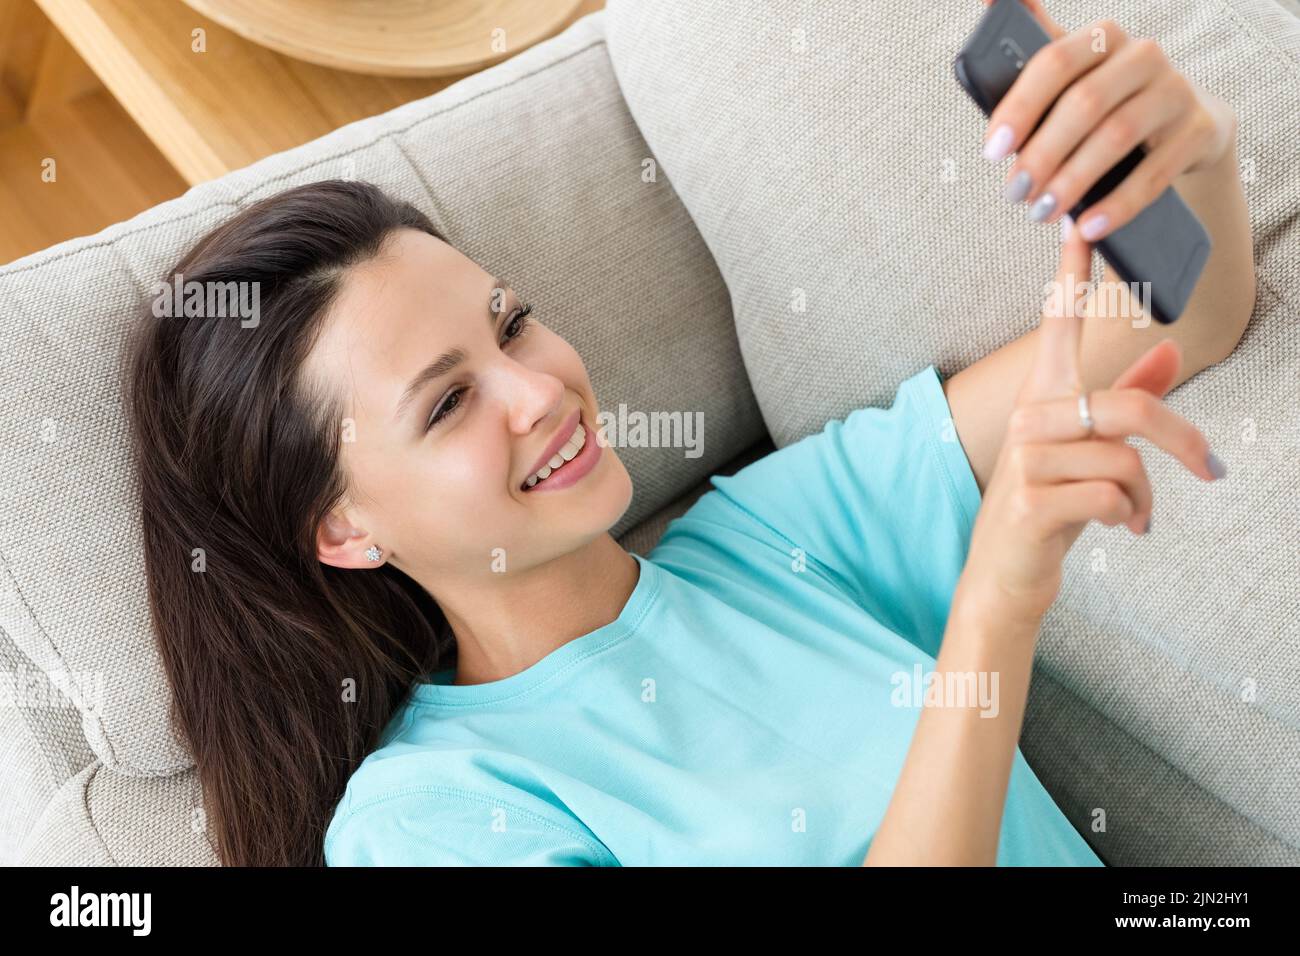 woman using phone idle lifestyle home leisure Stock Photo